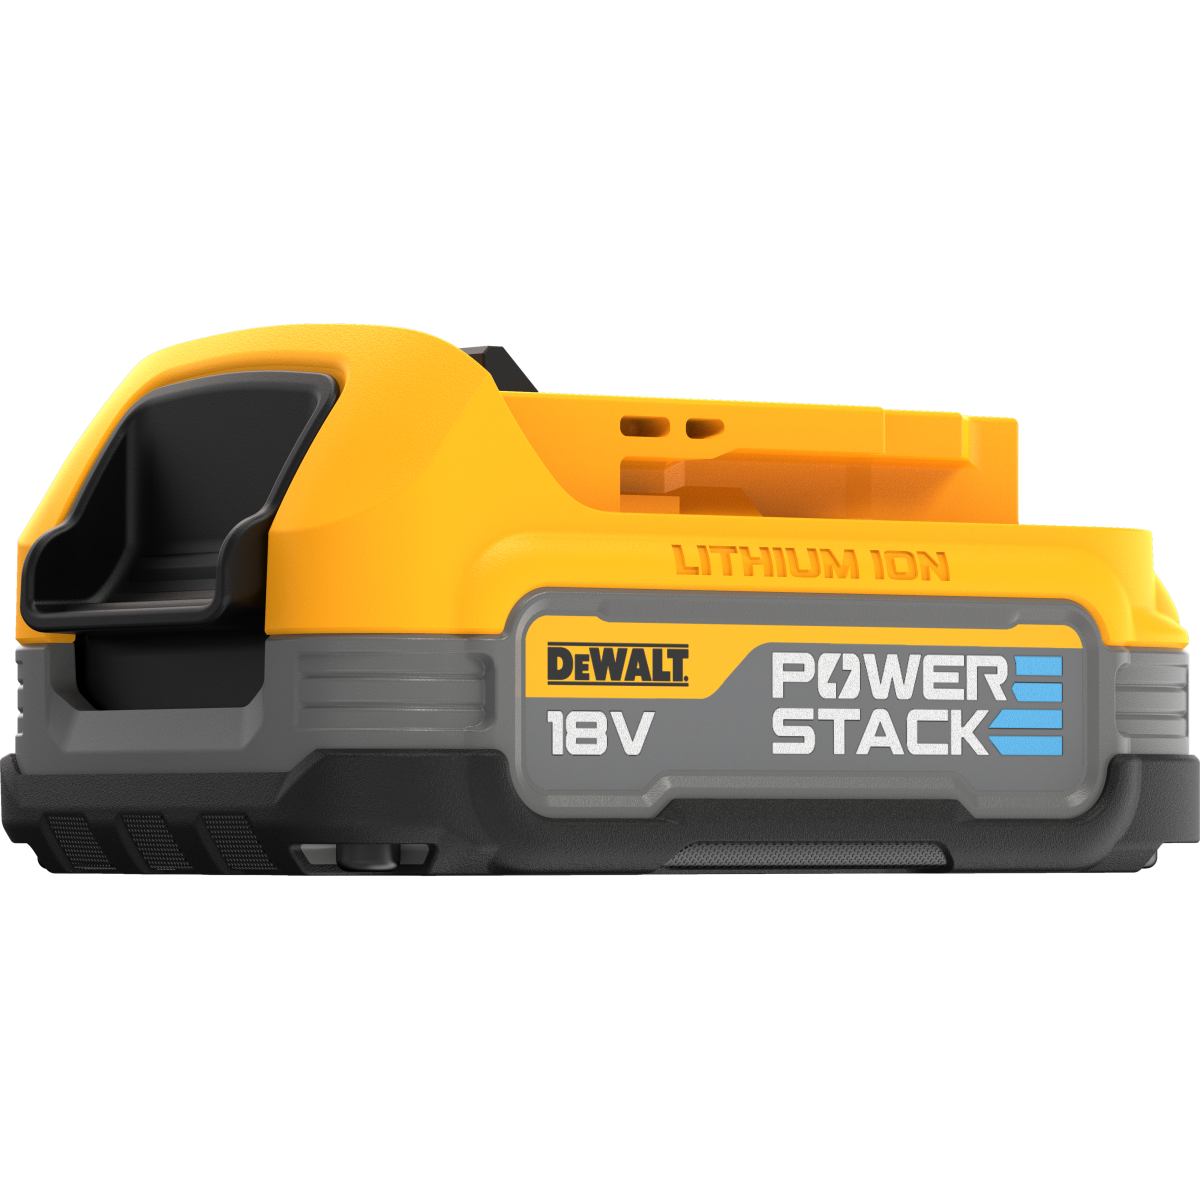 DeWalt DCBP034-XJ 18V Powerstack Compact Battery from Lawson HIS